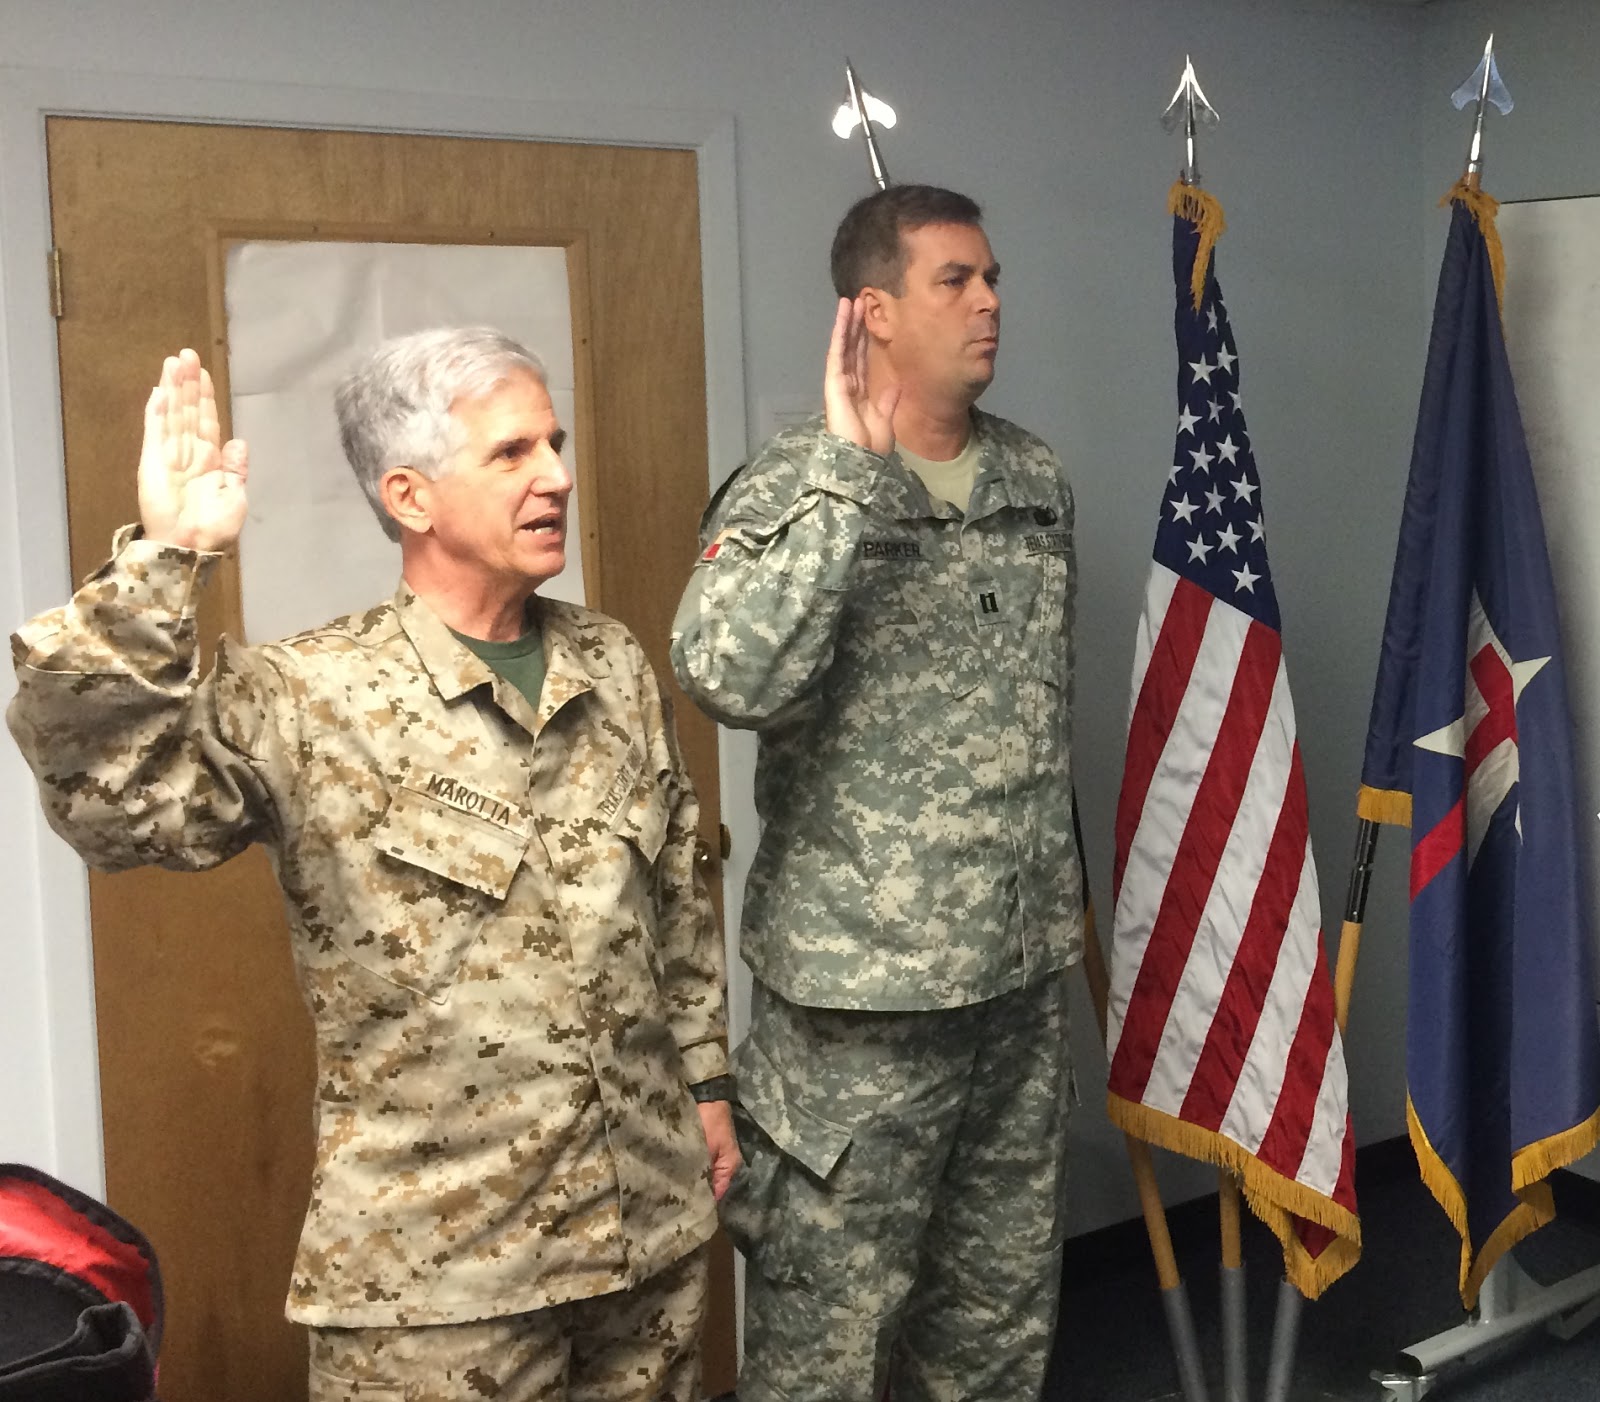 Taking the Oath of Enlistment